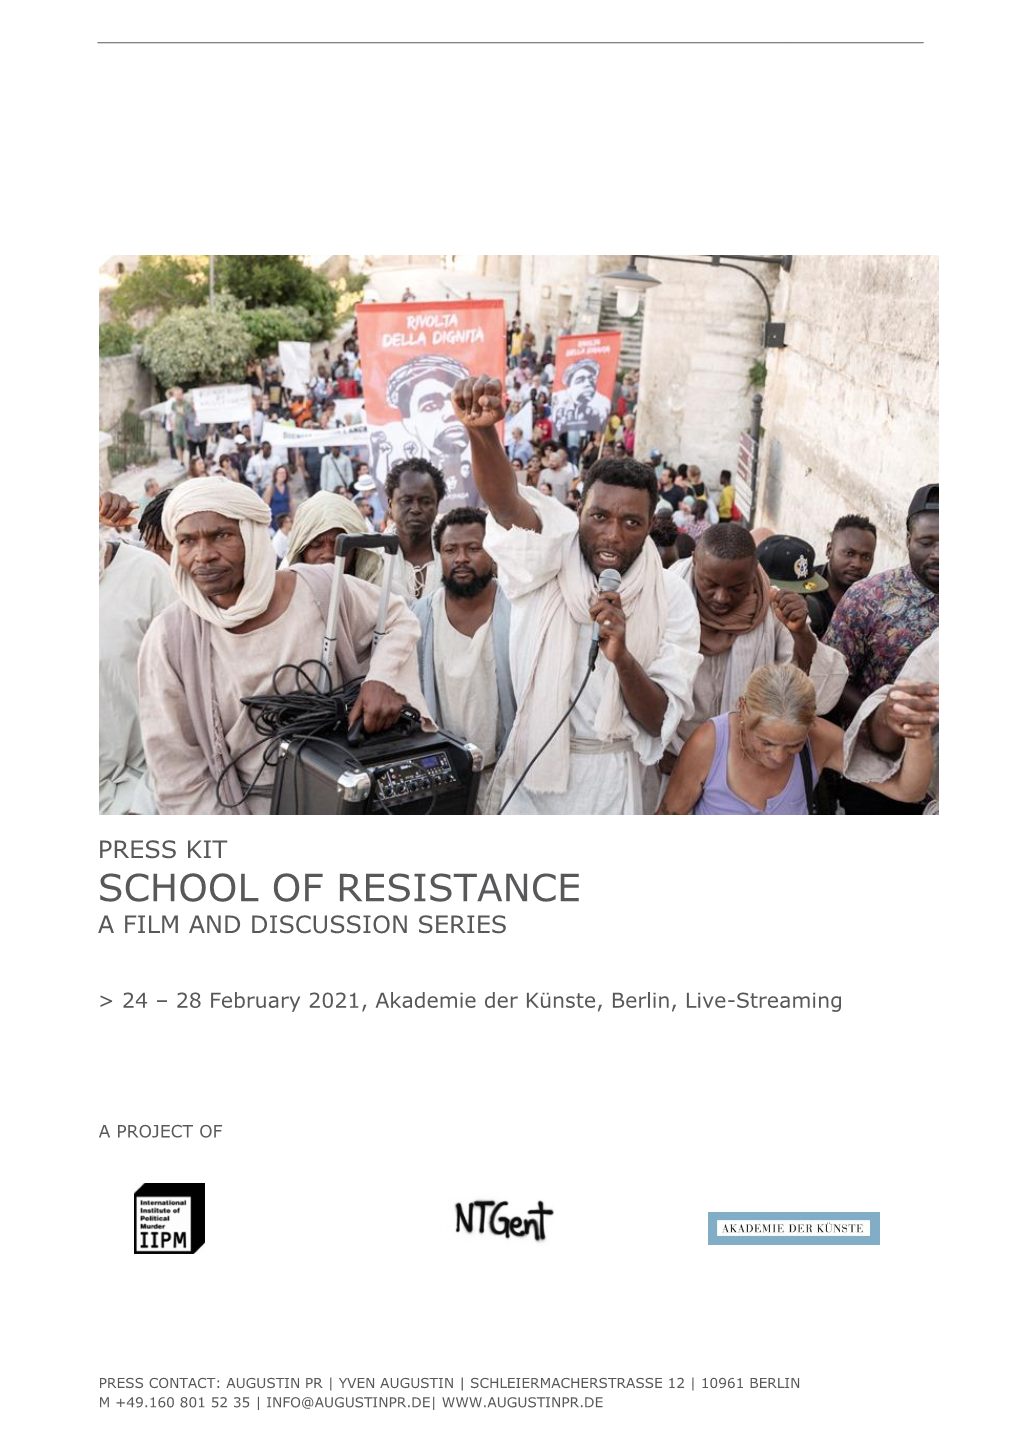 School of Resistance a Film and Discussion Series